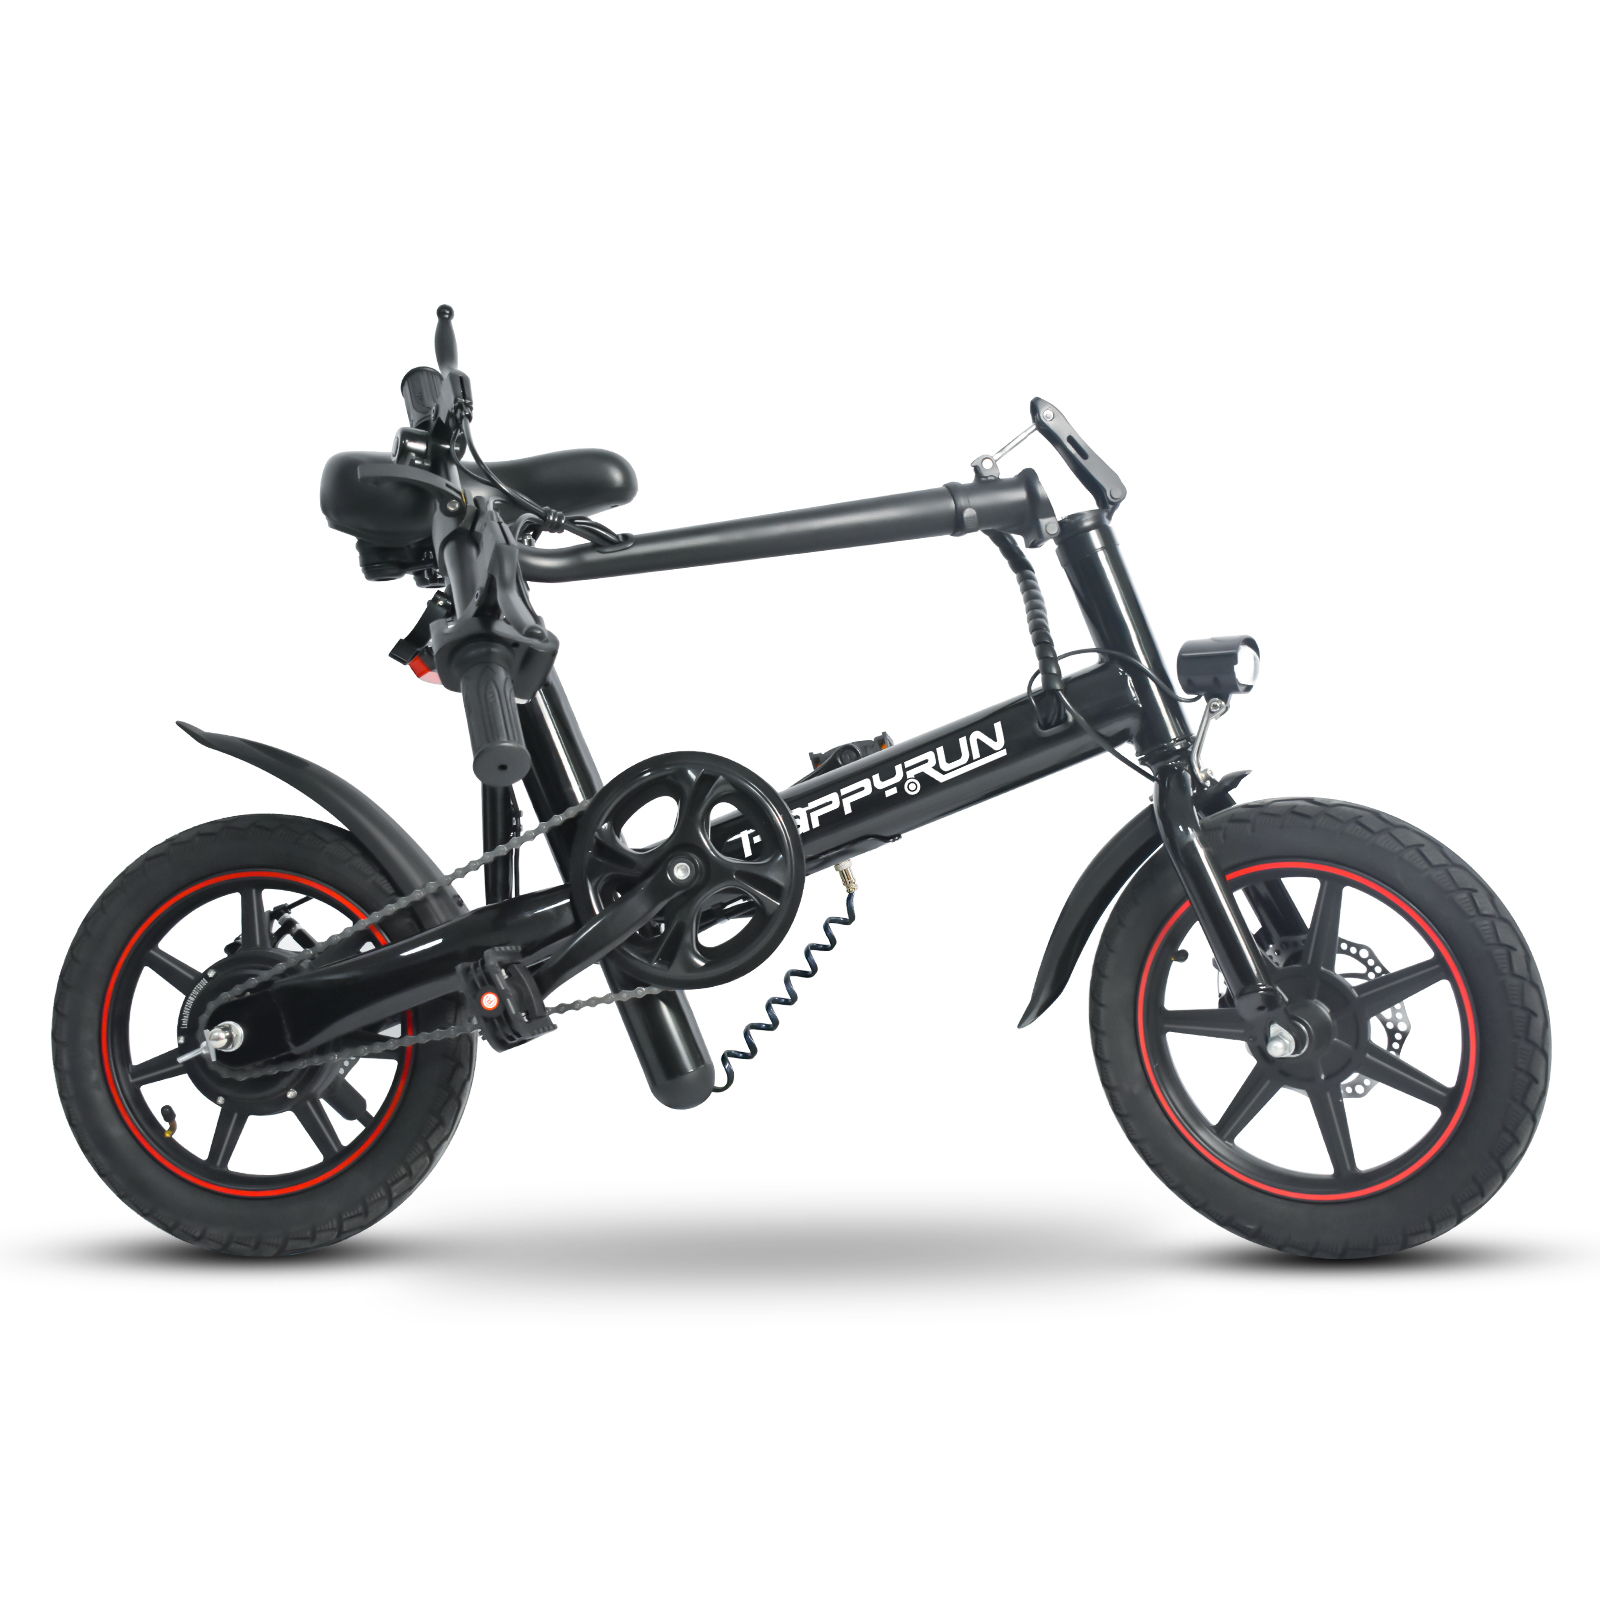 Find EU Direct Happyrun HR X40 250W 36V 6Ah 14inch Folding Electric Bicycle 25KM/H Top Speed 25KM Max Mileage Electric Bike for Sale on Gipsybee.com with cryptocurrencies